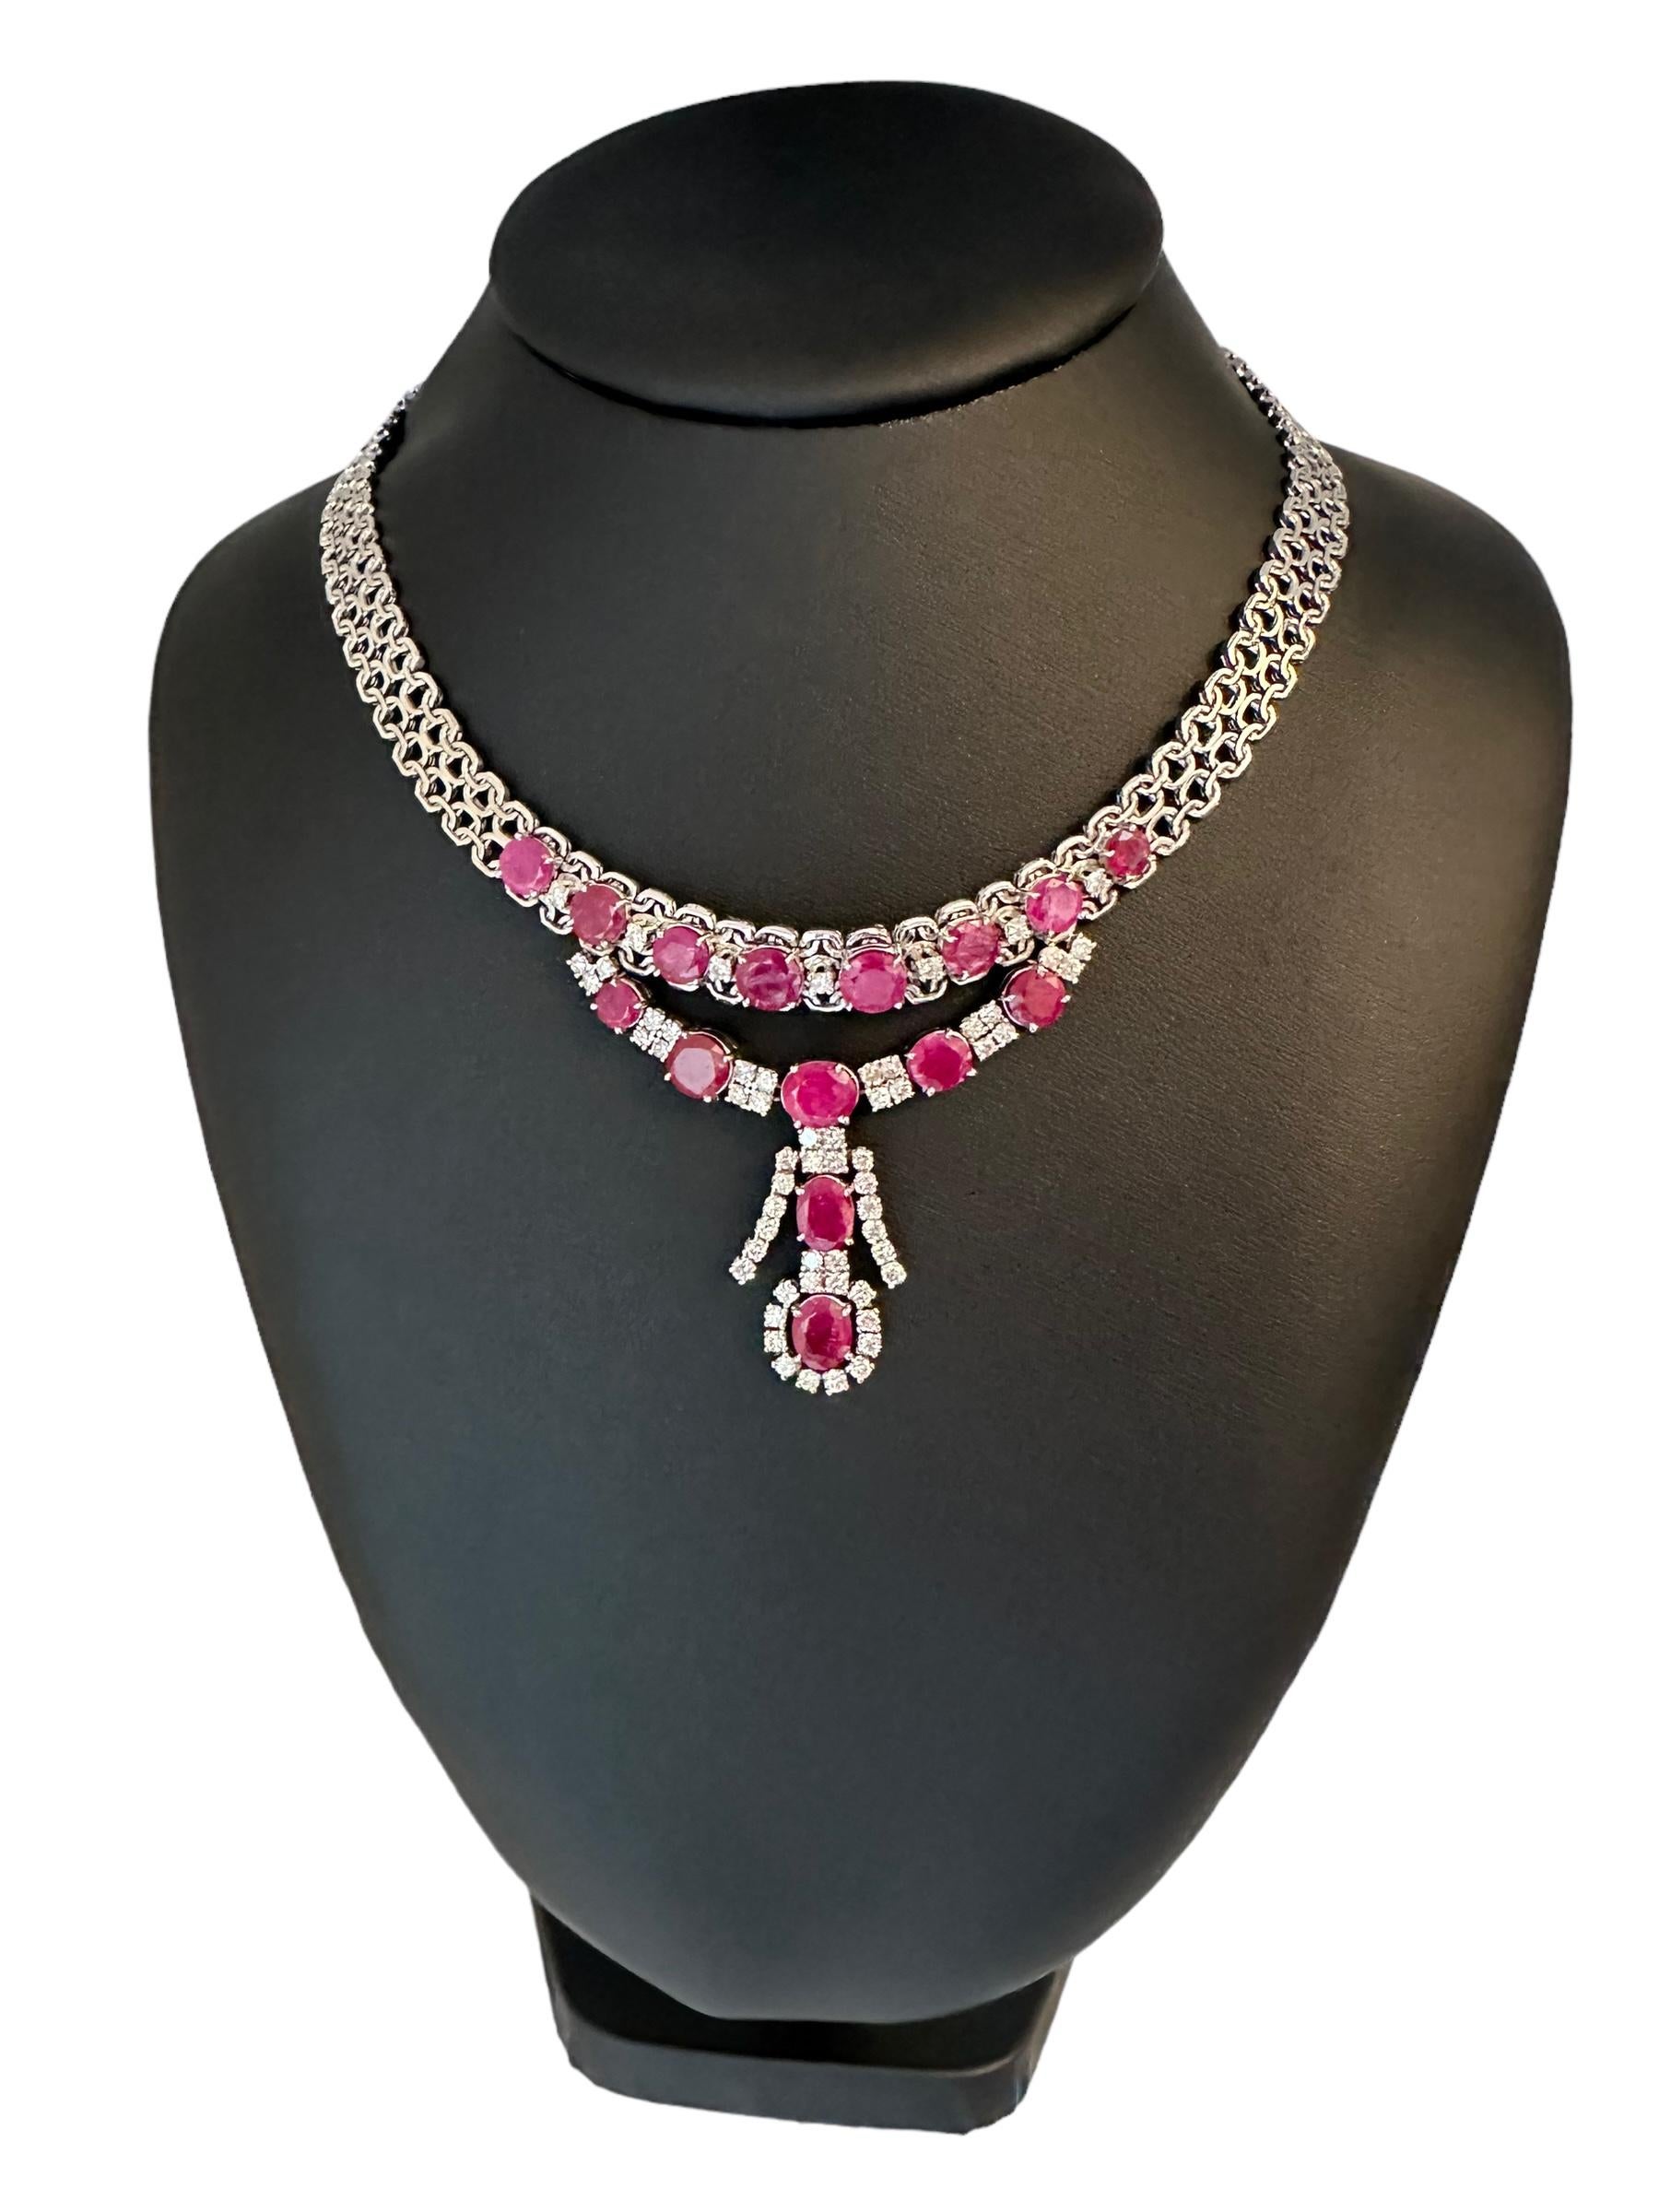 IGI Certified White Gold Diamonds and Rubies Necklace In Good Condition For Sale In Esch-Sur-Alzette, LU